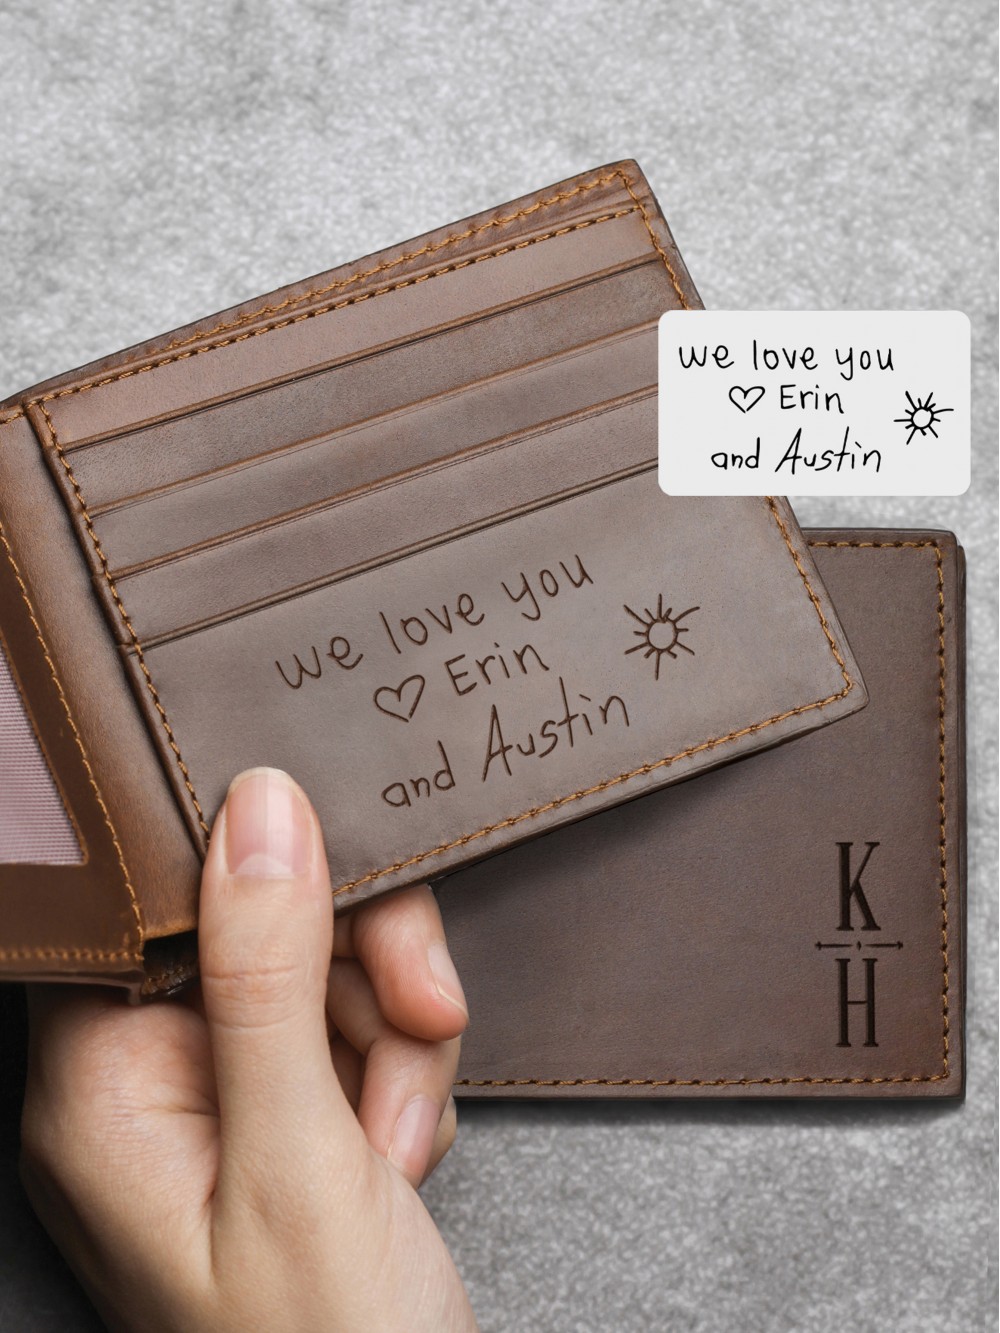 Engraved Leather Money Clip Wallet • Personalized Mens Leather Wallet • Custom Christmas Gifts for him Gifts for Dad Husband gift Trouwen Cadeaus & Aandenkens Cadeaus voor bruidsjonkers 